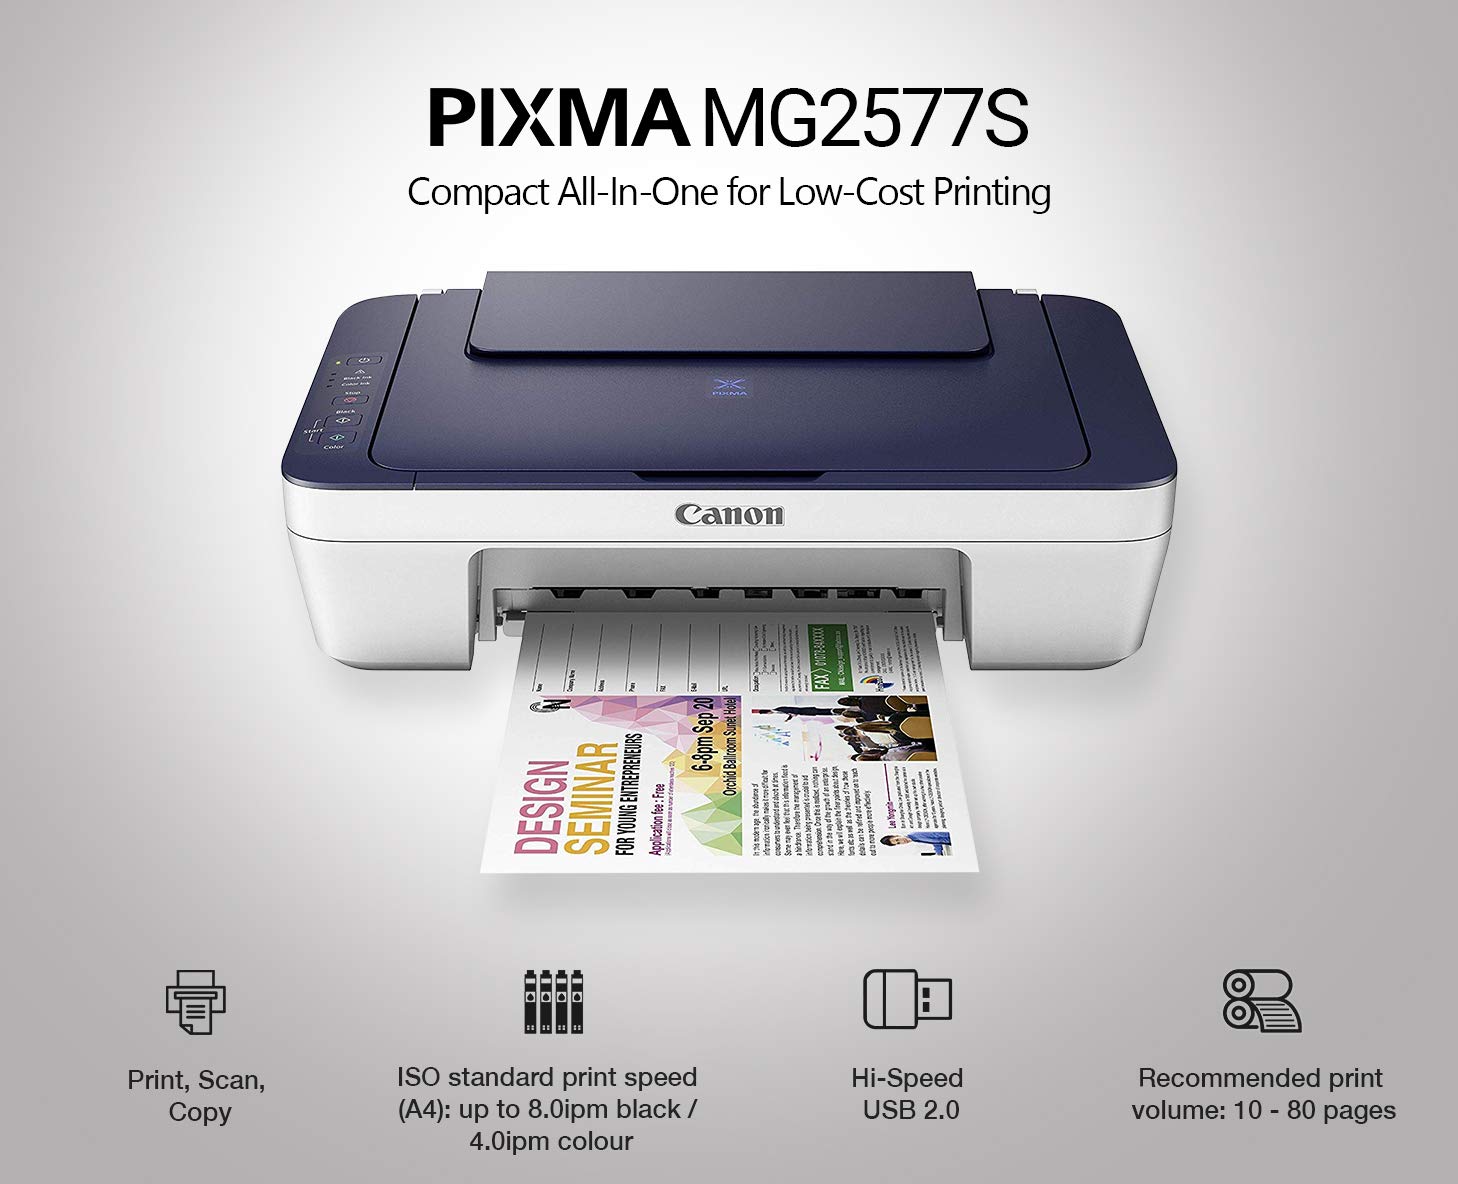 Canon PIXMA MG2577s All-in-One Inkjet Colour Printer, Canon PIXMA MG2577s All-in-One Inkjet Colour Printer in india, Canon PIXMA MG2577s All-in-One Inkjet Colour Printer best online price, Canon PIXMA MG2577s All-in-One Inkjet Colour Printer features & specifications, Canon PIXMA MG2577s All-in-One Inkjet Colour Printer on discountdeals4you, Canon PIXMA MG2577s All-in-One Inkjet Colour Printer best price in india,